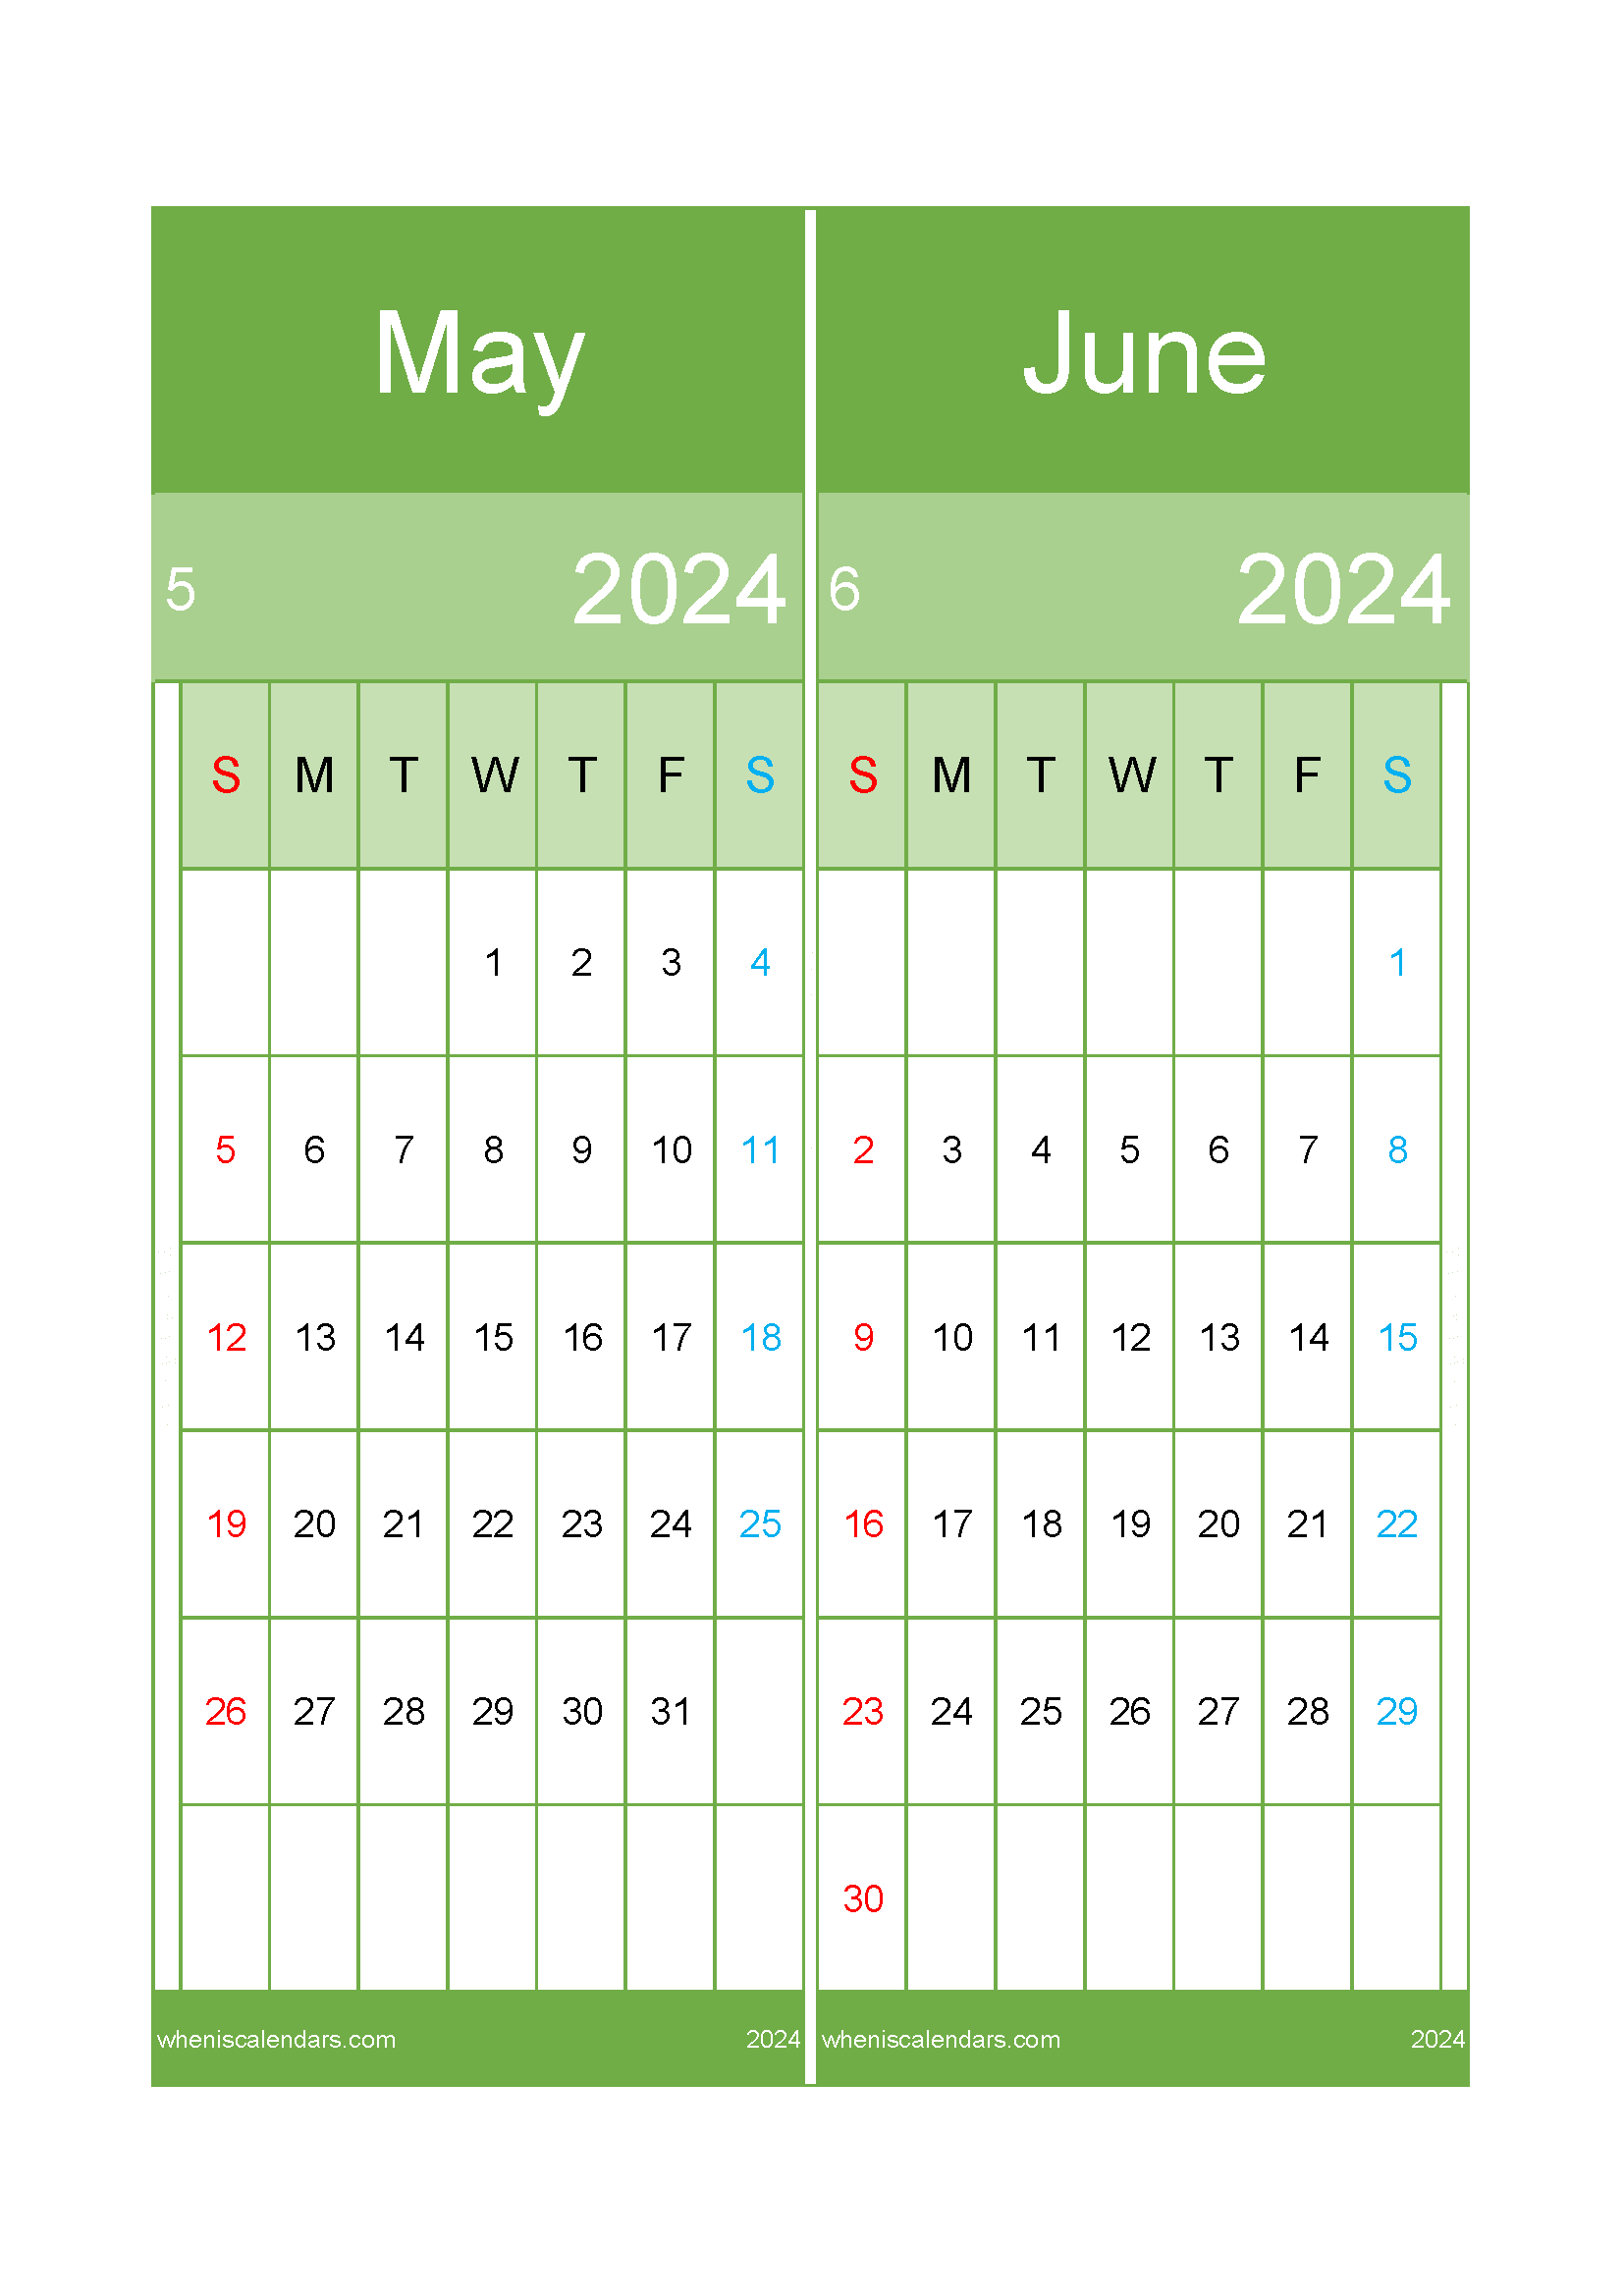 Download May and June calendar 2024 A4 MJ242026